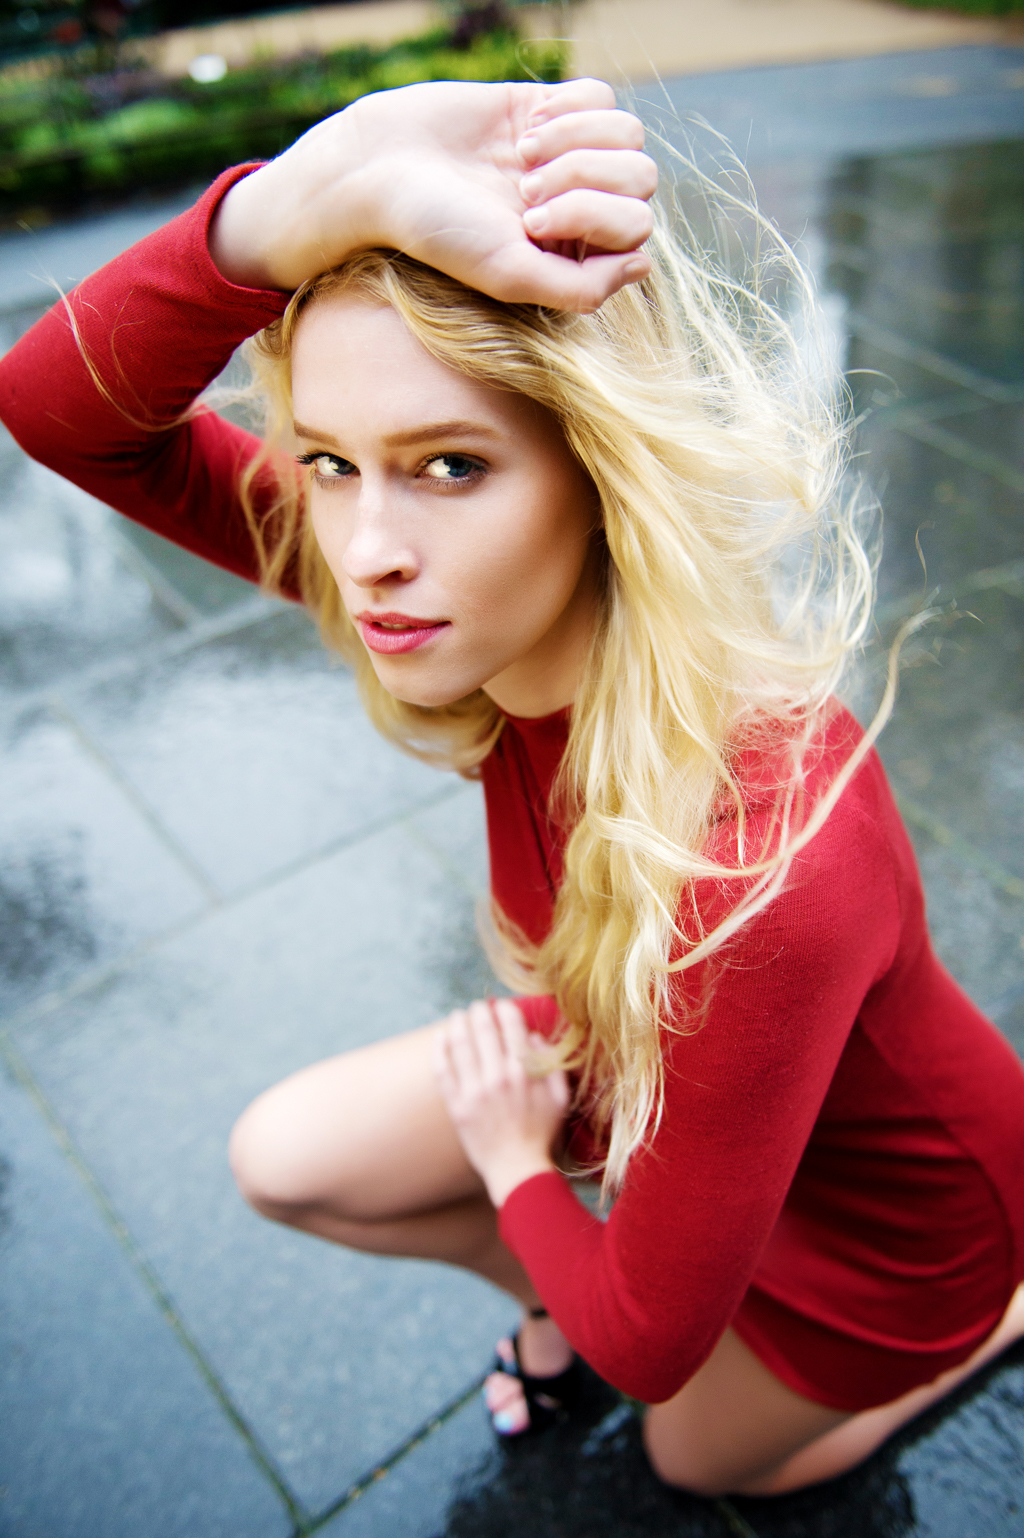 a model in a red dress and long blonde hair squats on a rain covered sidewalk